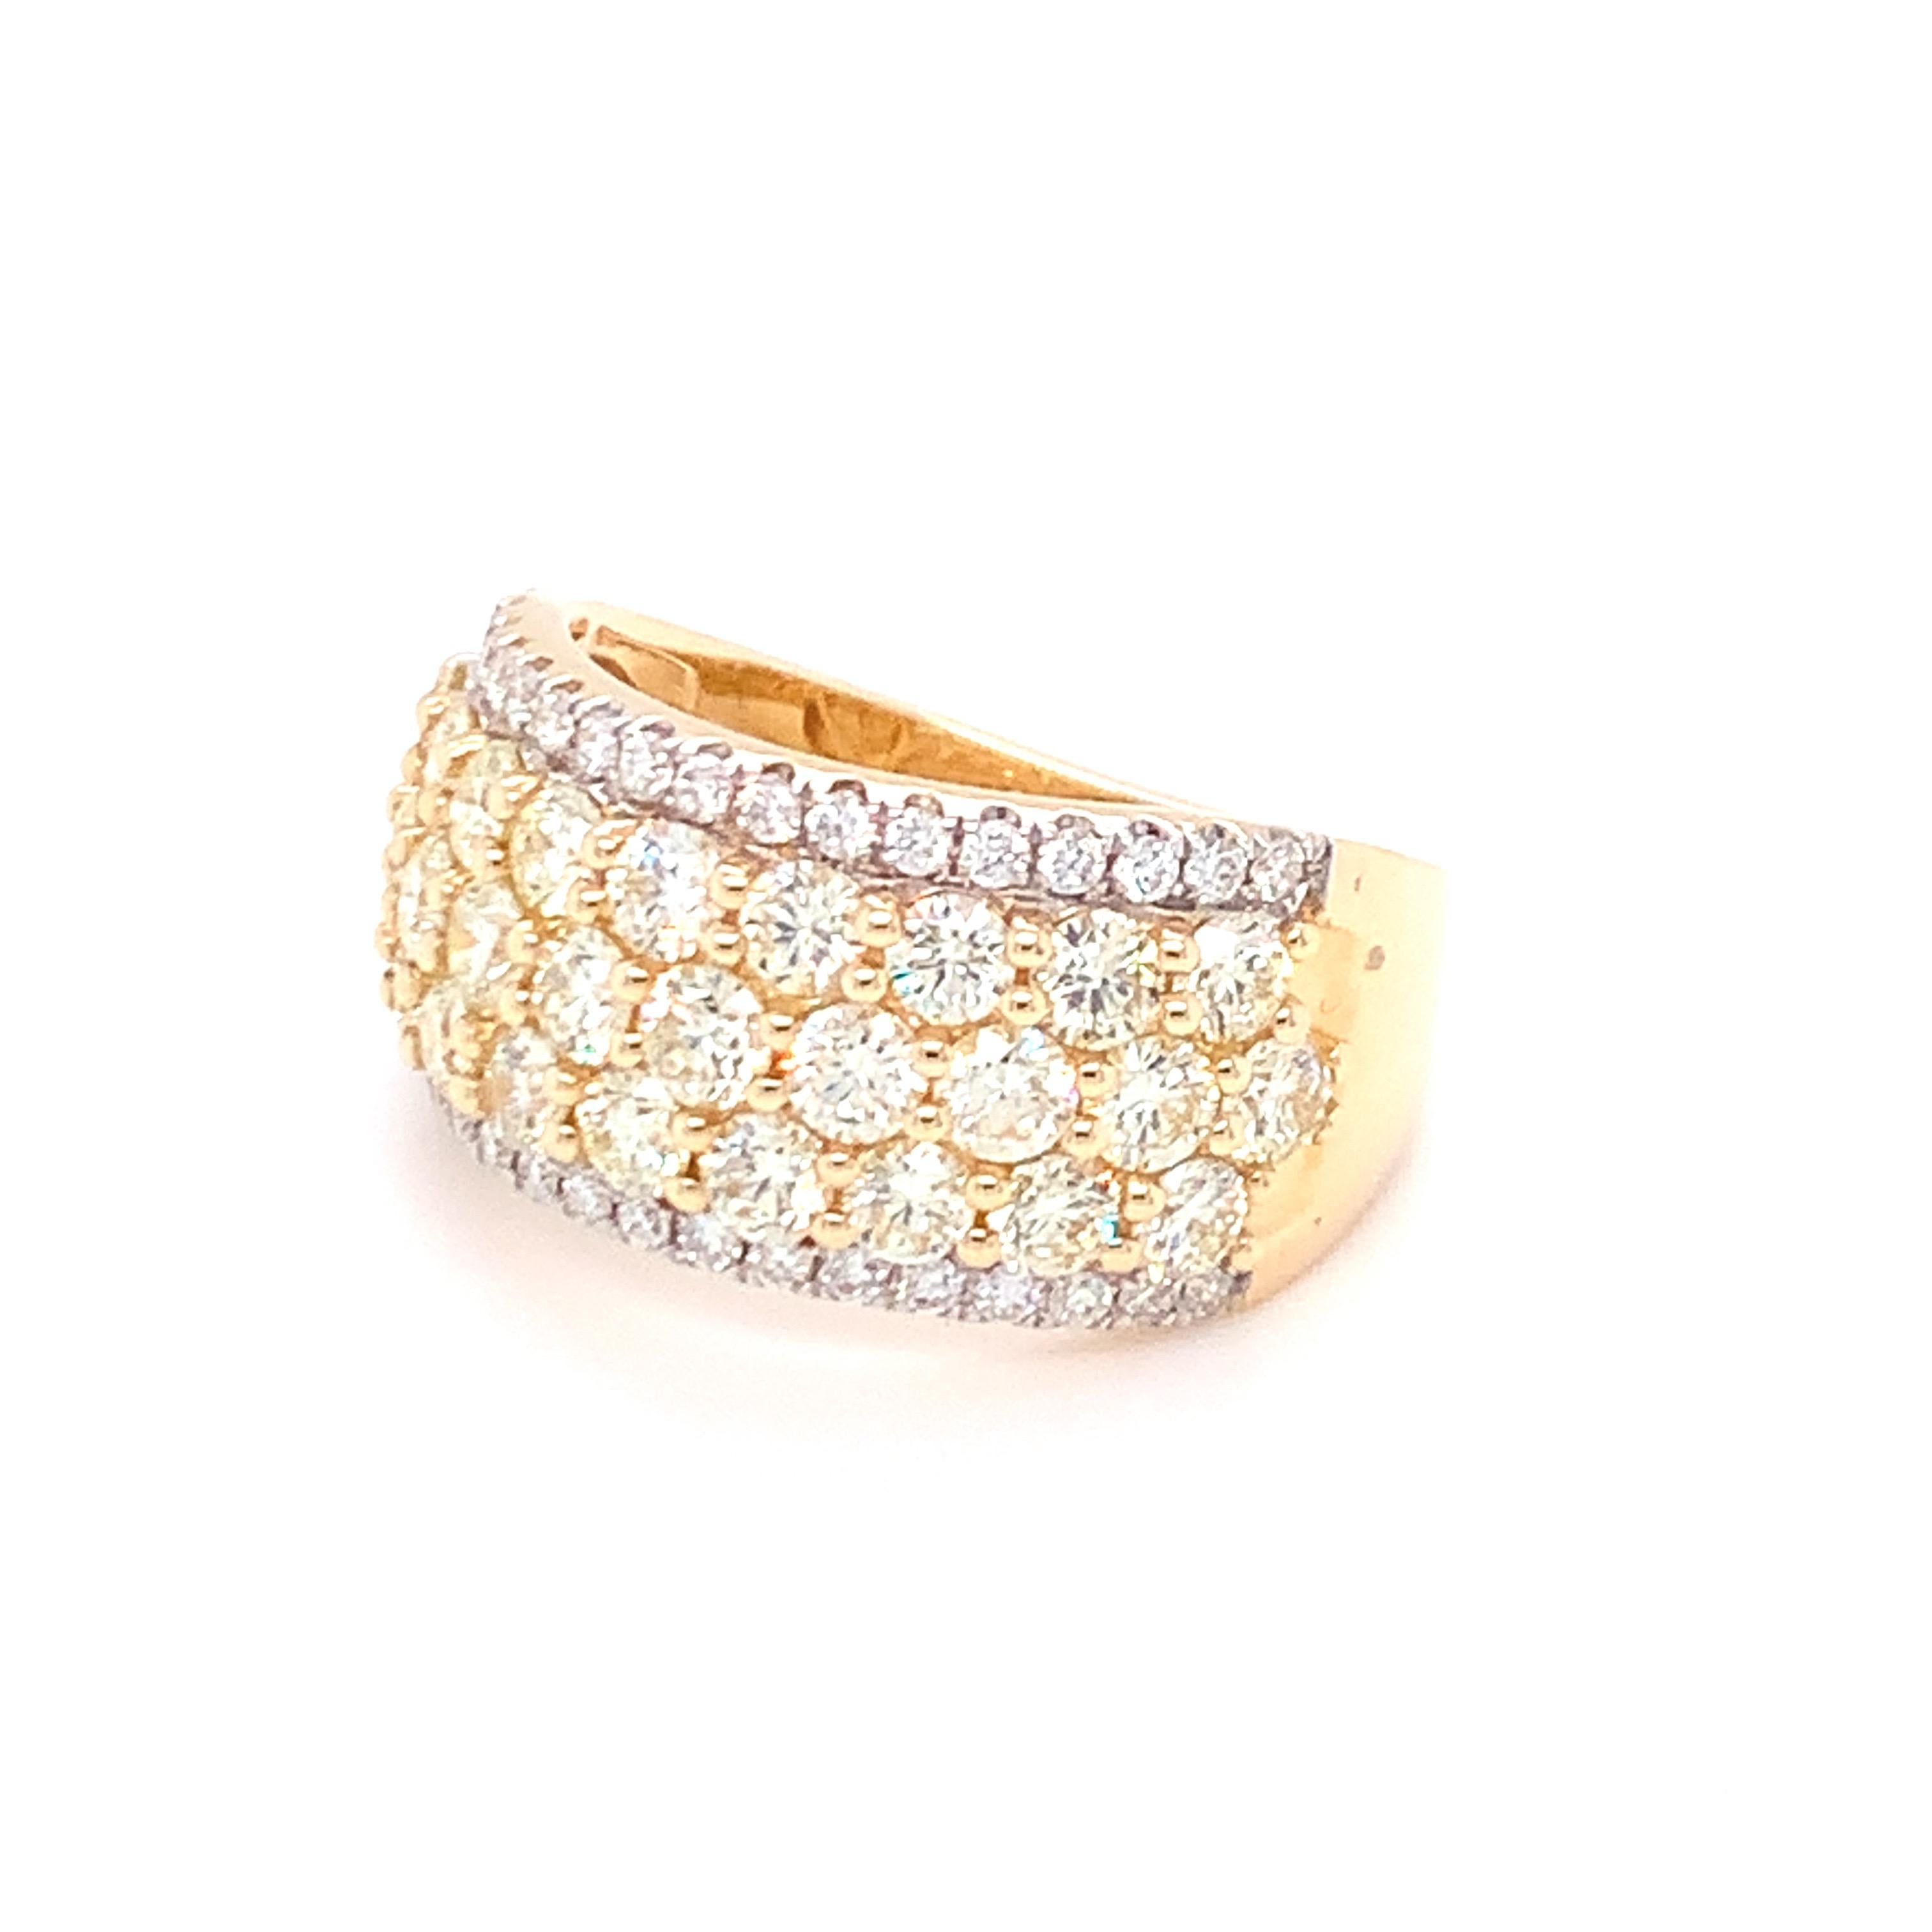 2.50 Carat Yellow & White Diamond Band Ring in 14k Yellow Gold For Sale 11